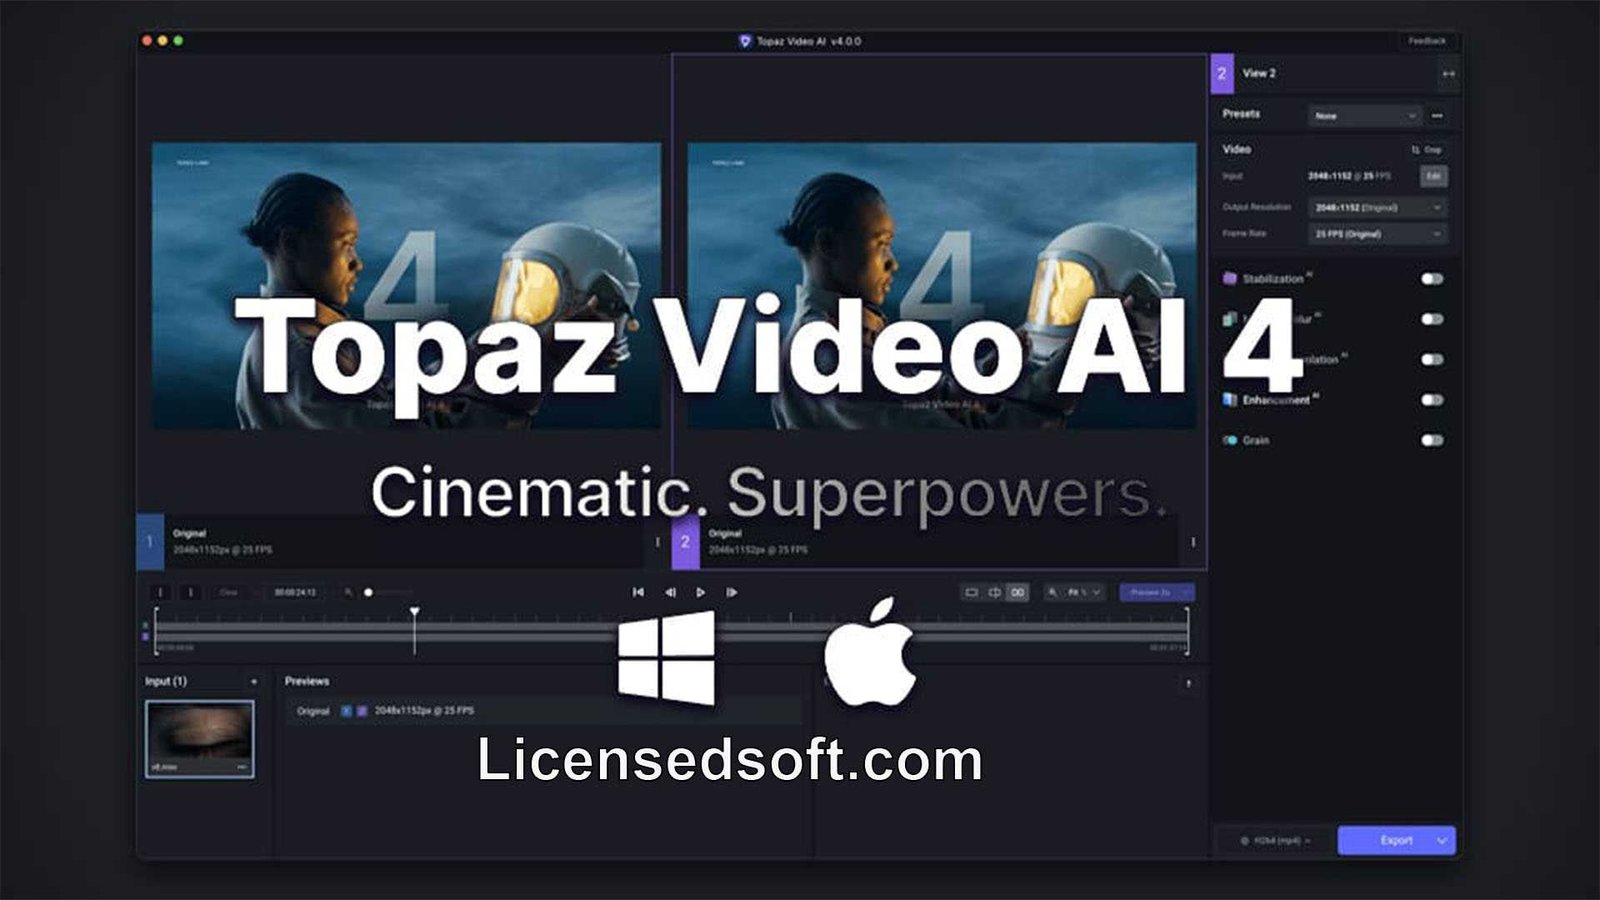 Topaz Video AI 4.1.1 For macOS Lifetime Premium cover photo by licensedsoft